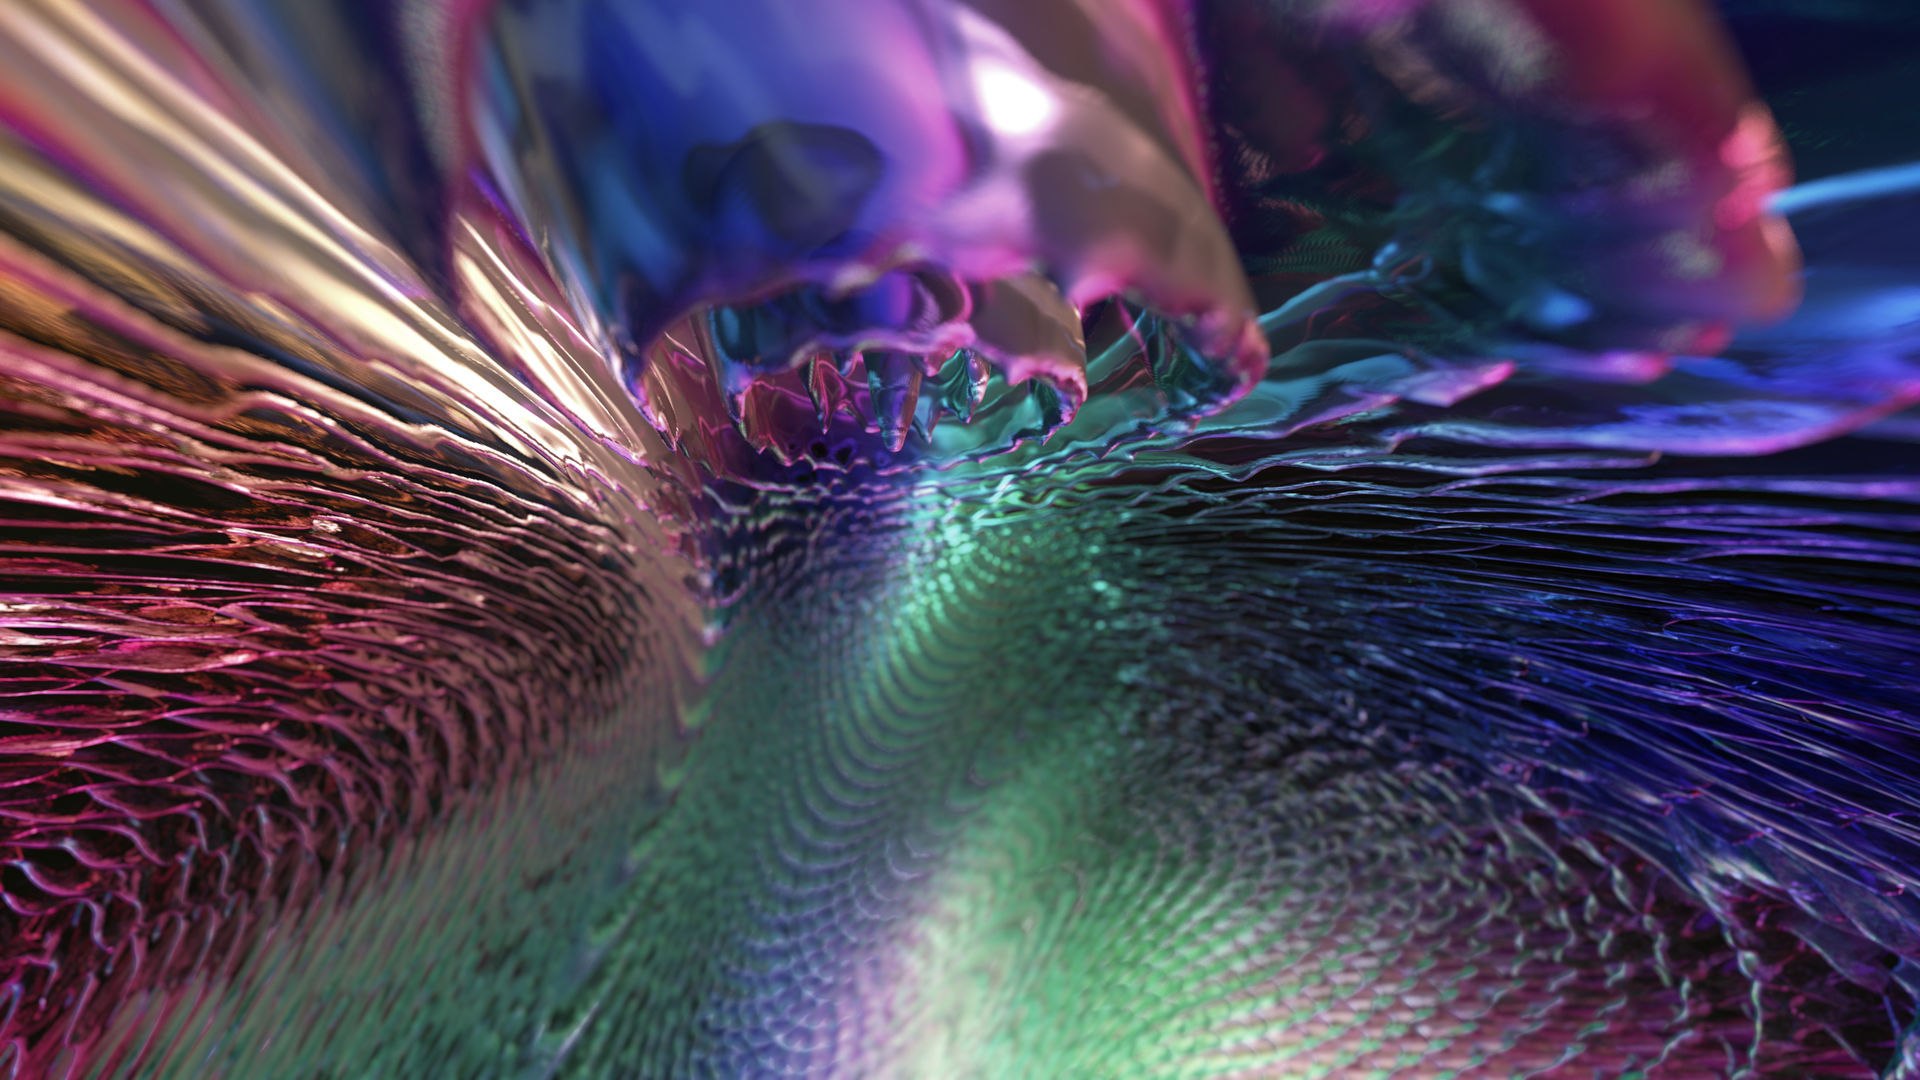 Zbrush Doodle: Day 2697 - Inner Glass World by UnexpectedToy on DeviantArt